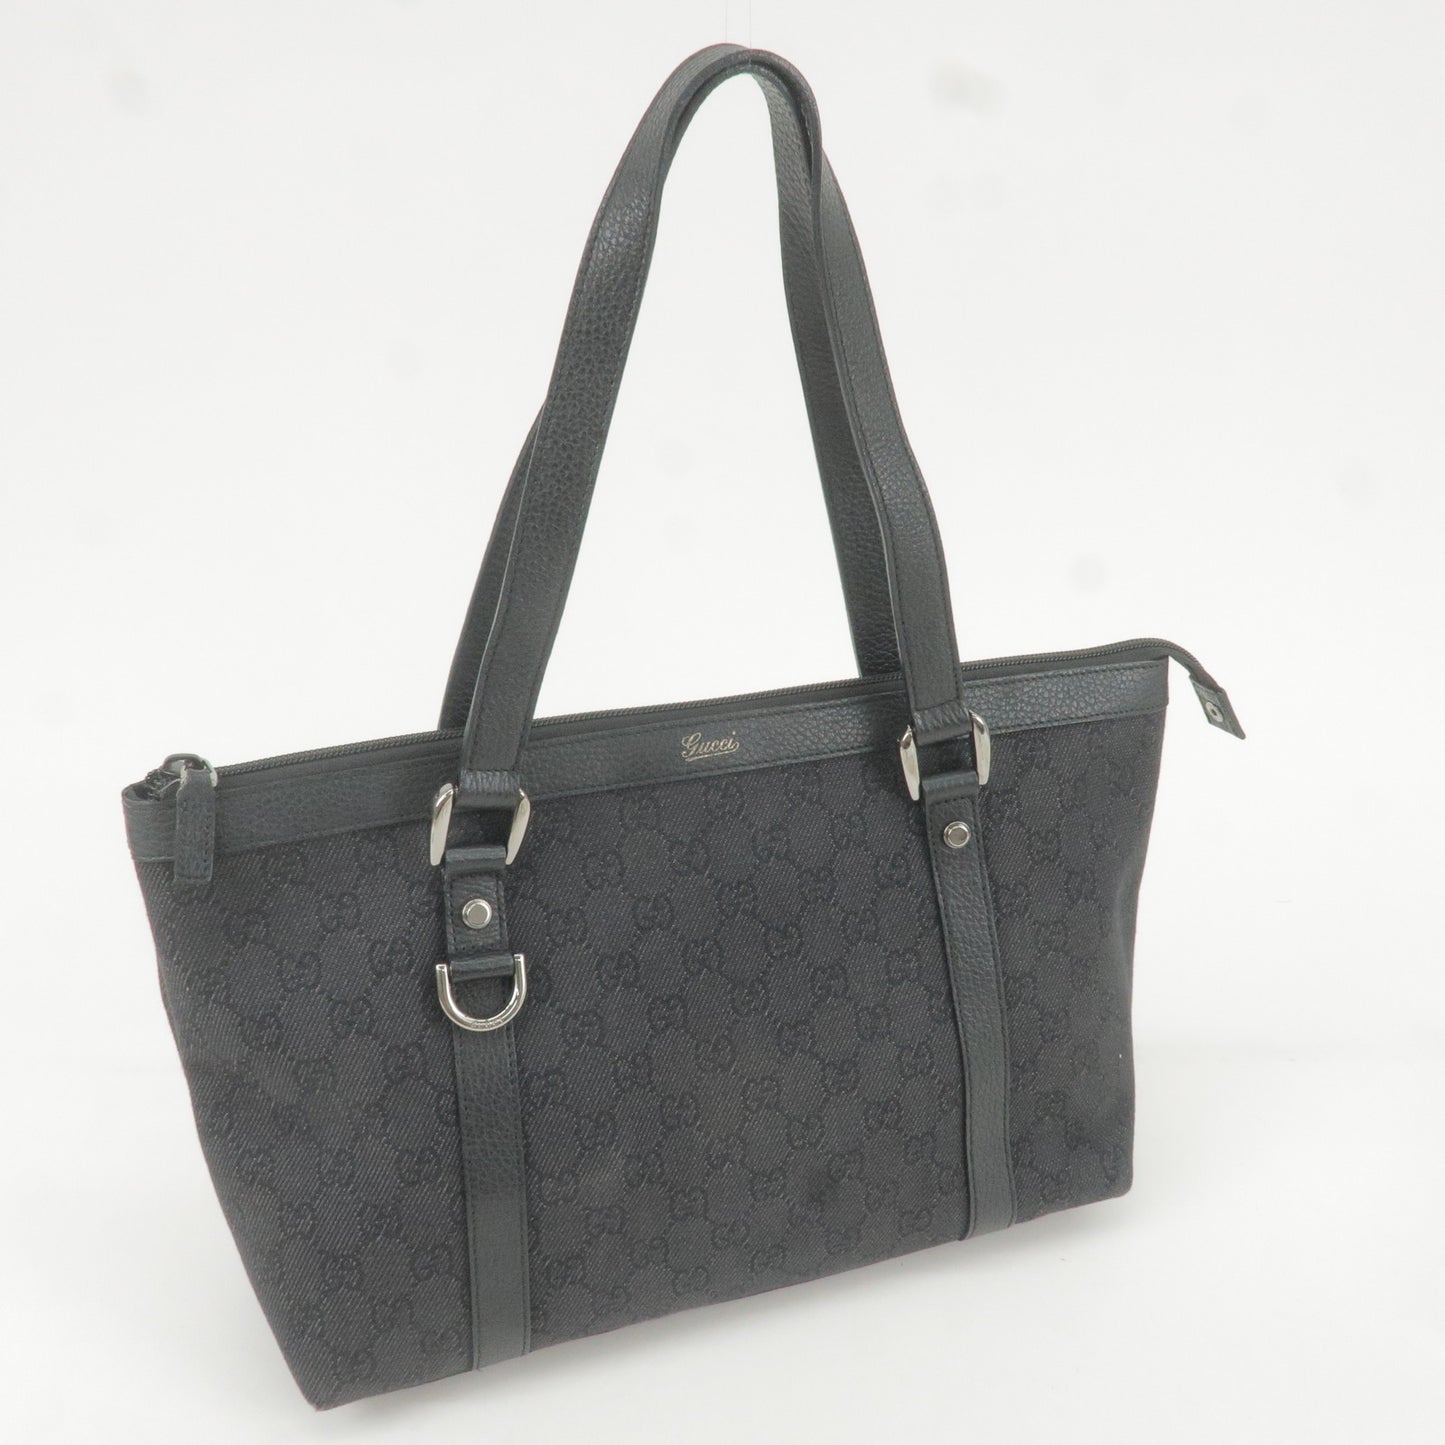 GUCCI Abbey GG Canvas Leather Tote Bag Hand Bag Black 268640